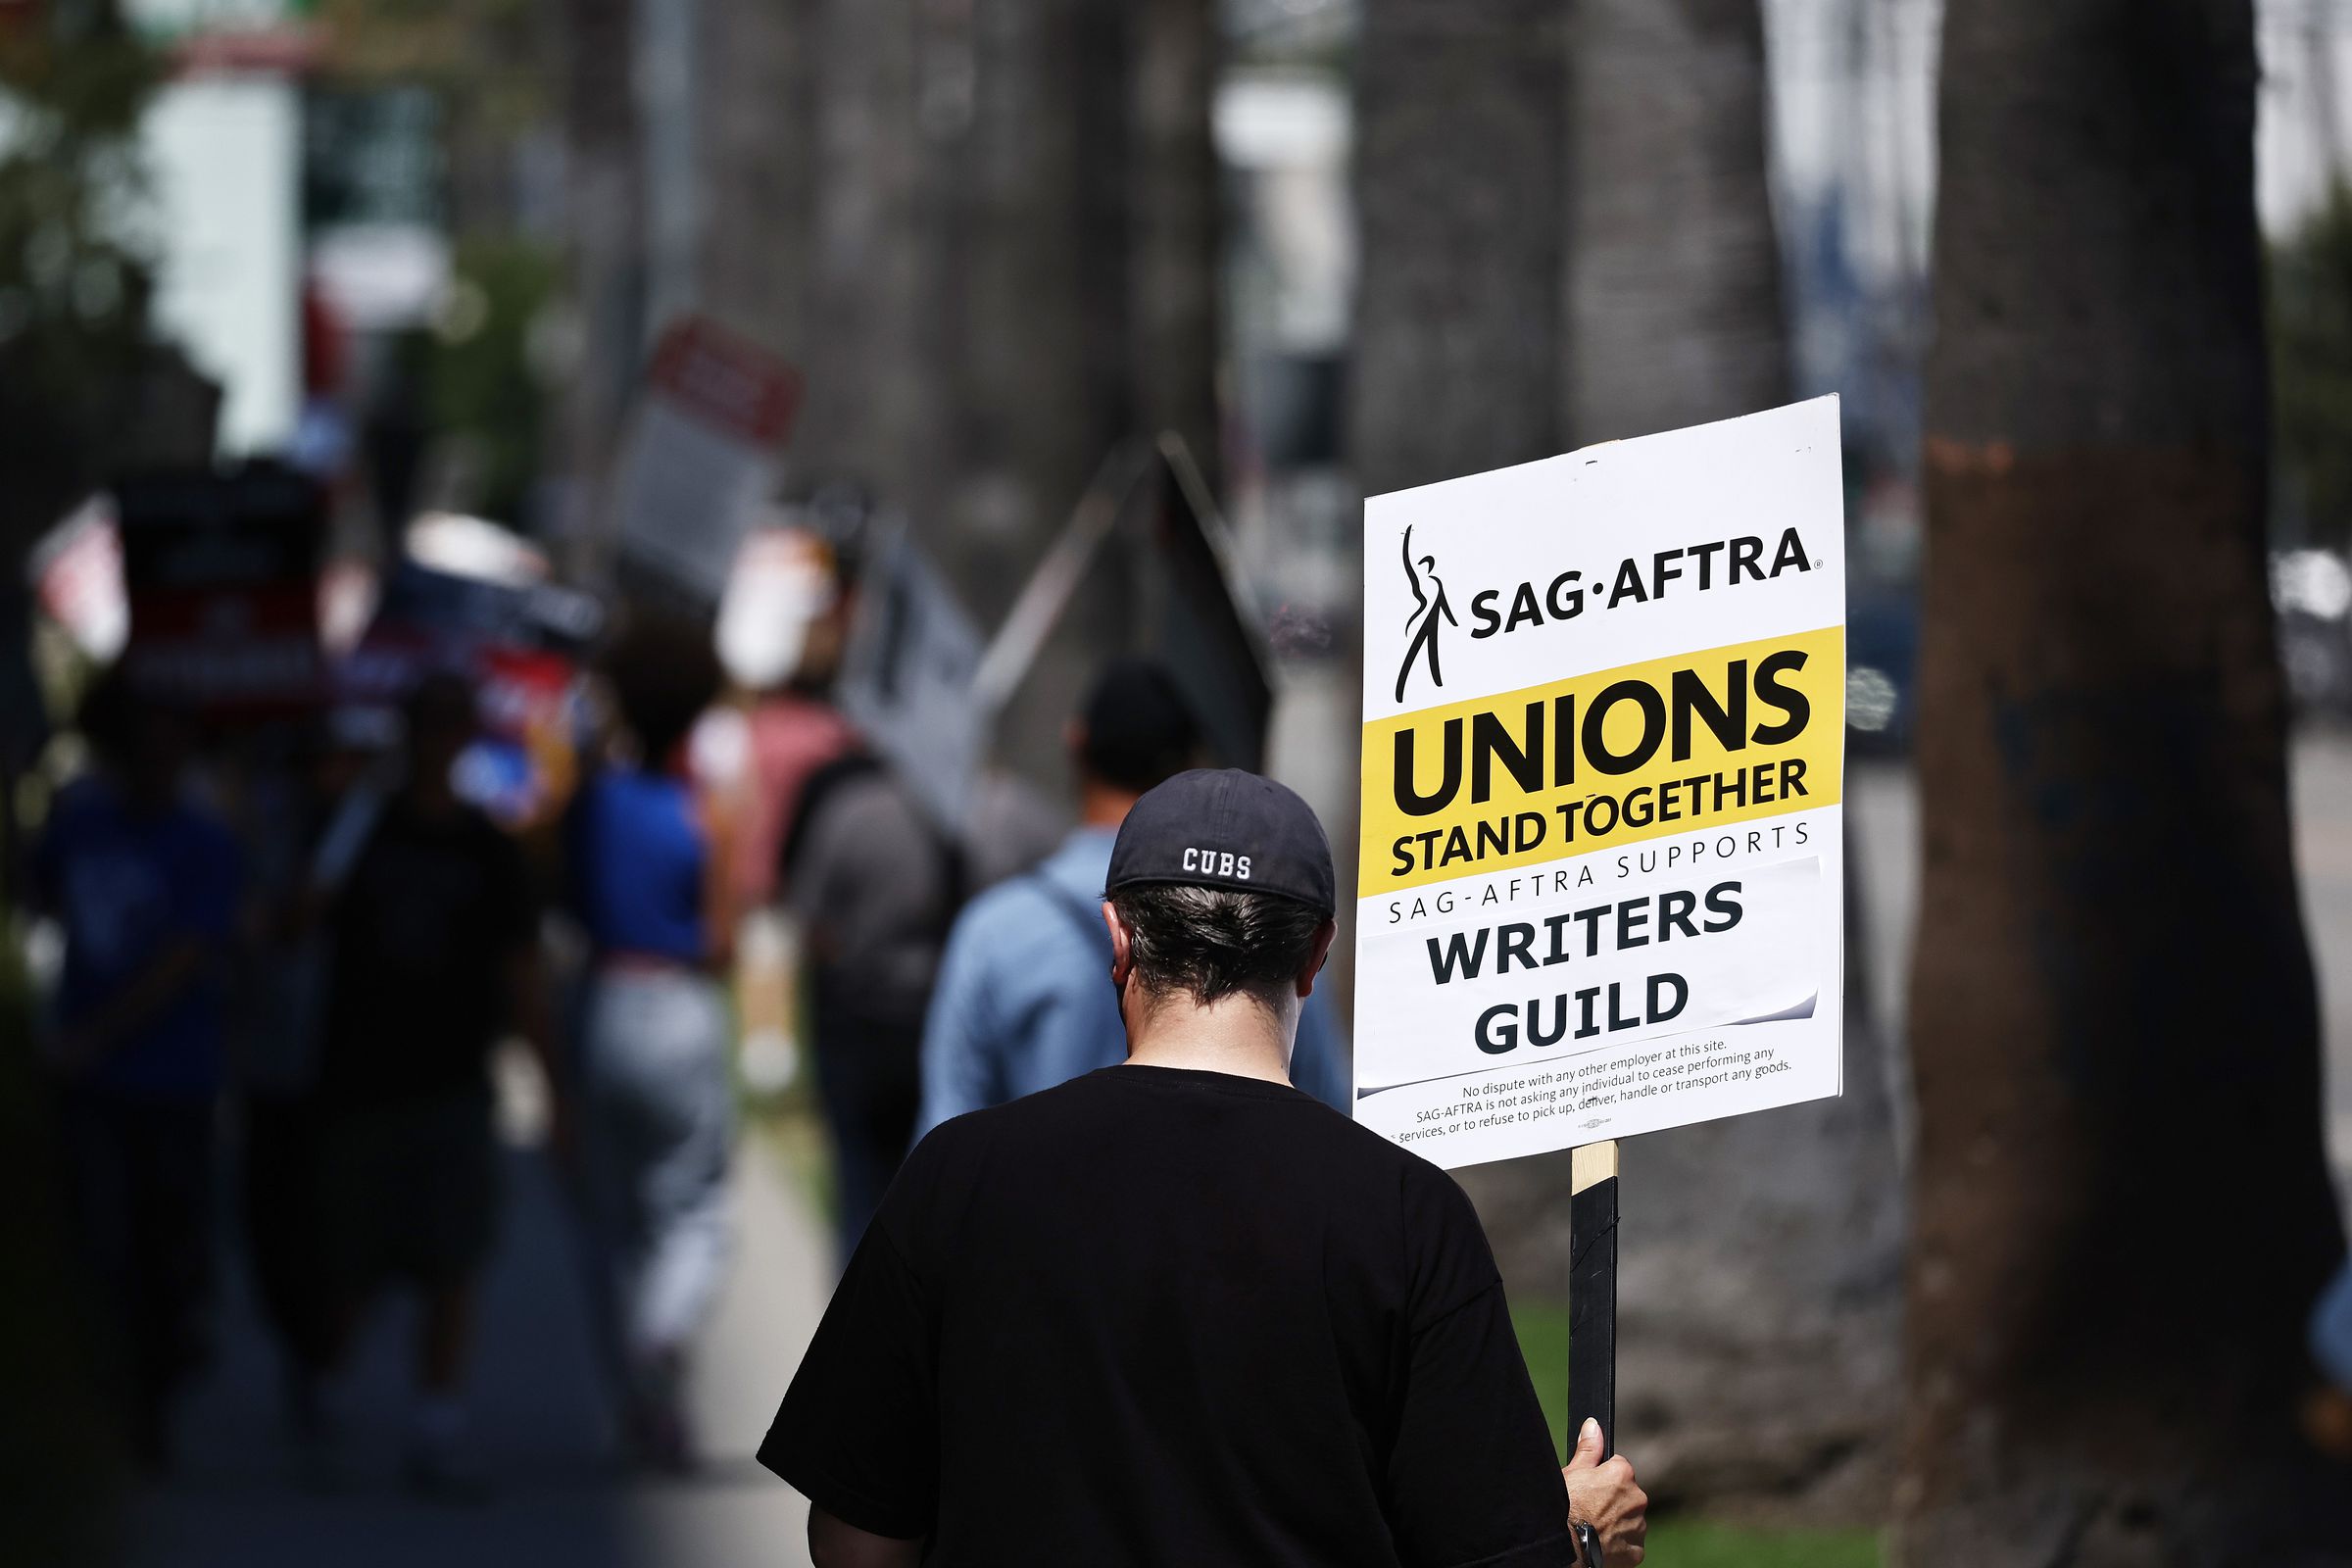 A sign reads ‘Unions Stand Together’ as SAG-AFTRA members walk the picket line in solidarity with striking WGA (Writers Guild of America) workers.